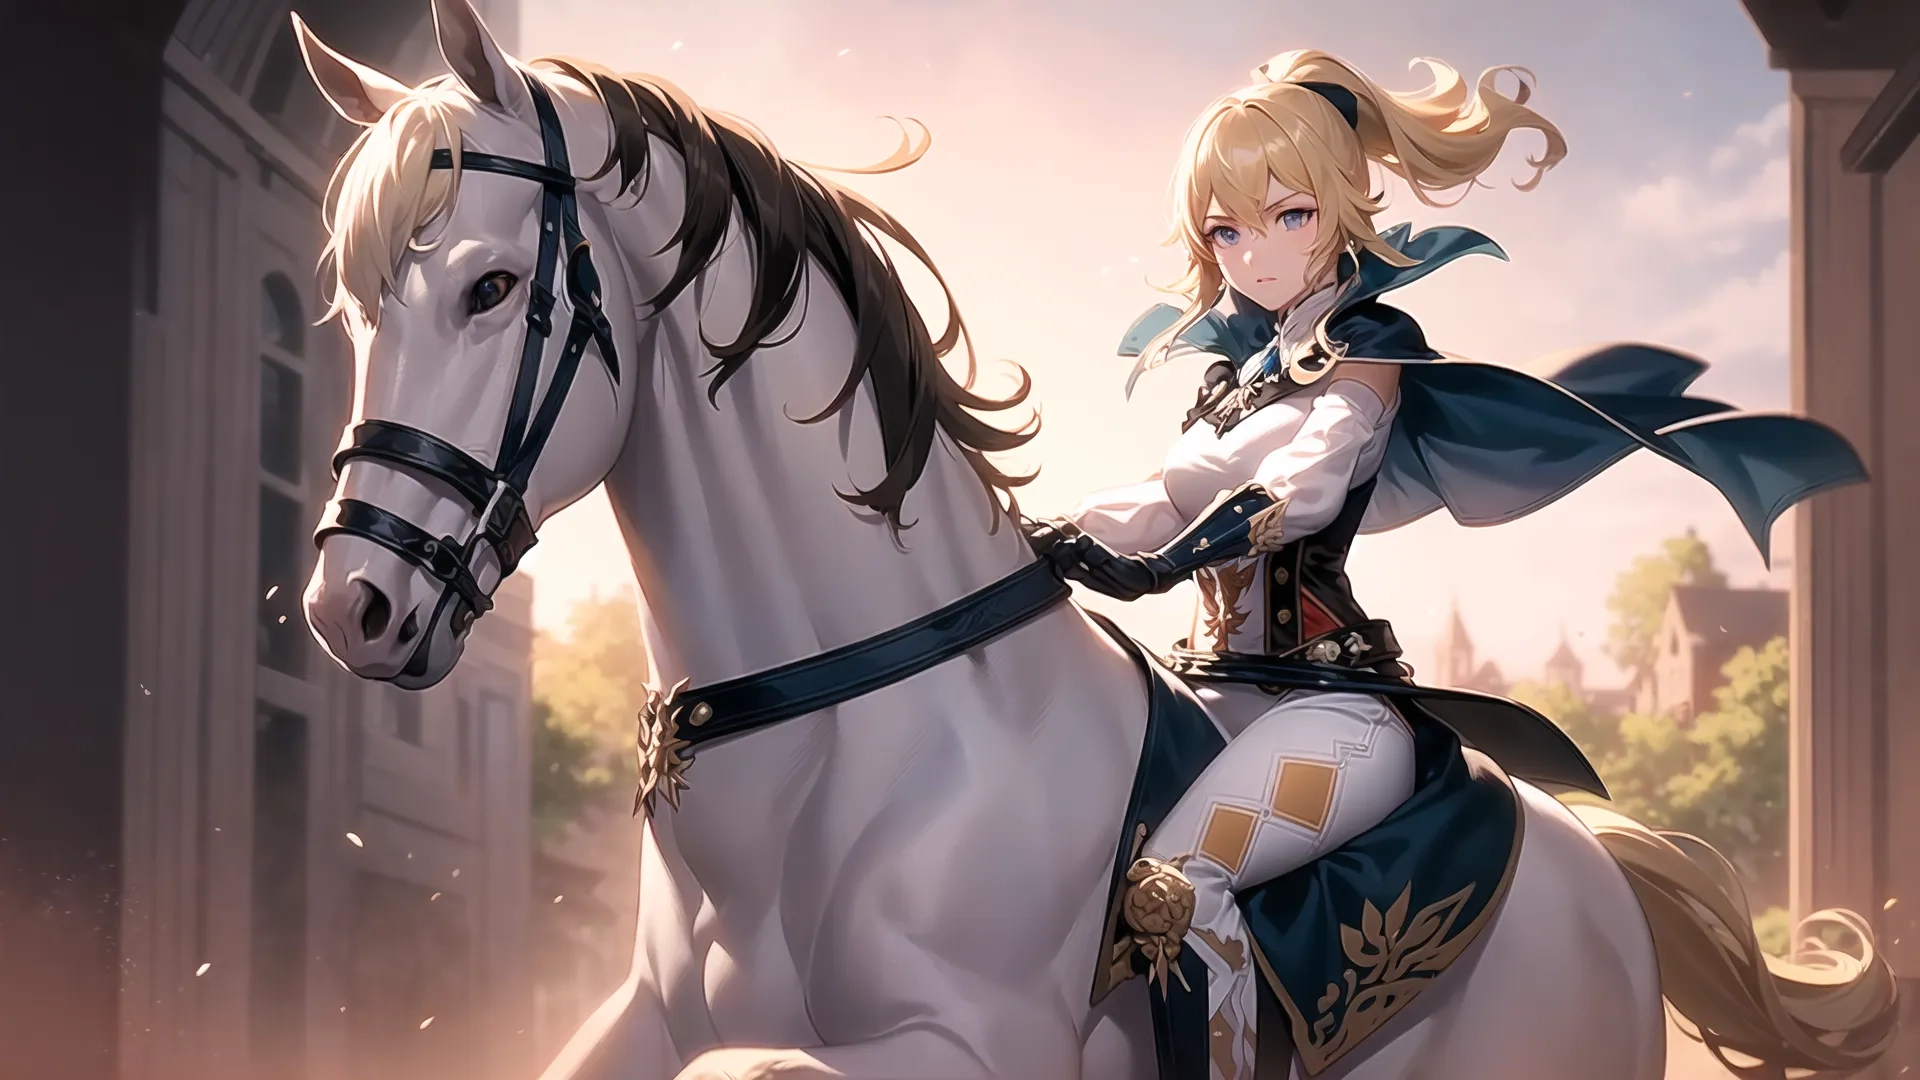 the woman in the dress of fate fortune is on the horse, going on his way to battle or return, in this illustration by a concept
